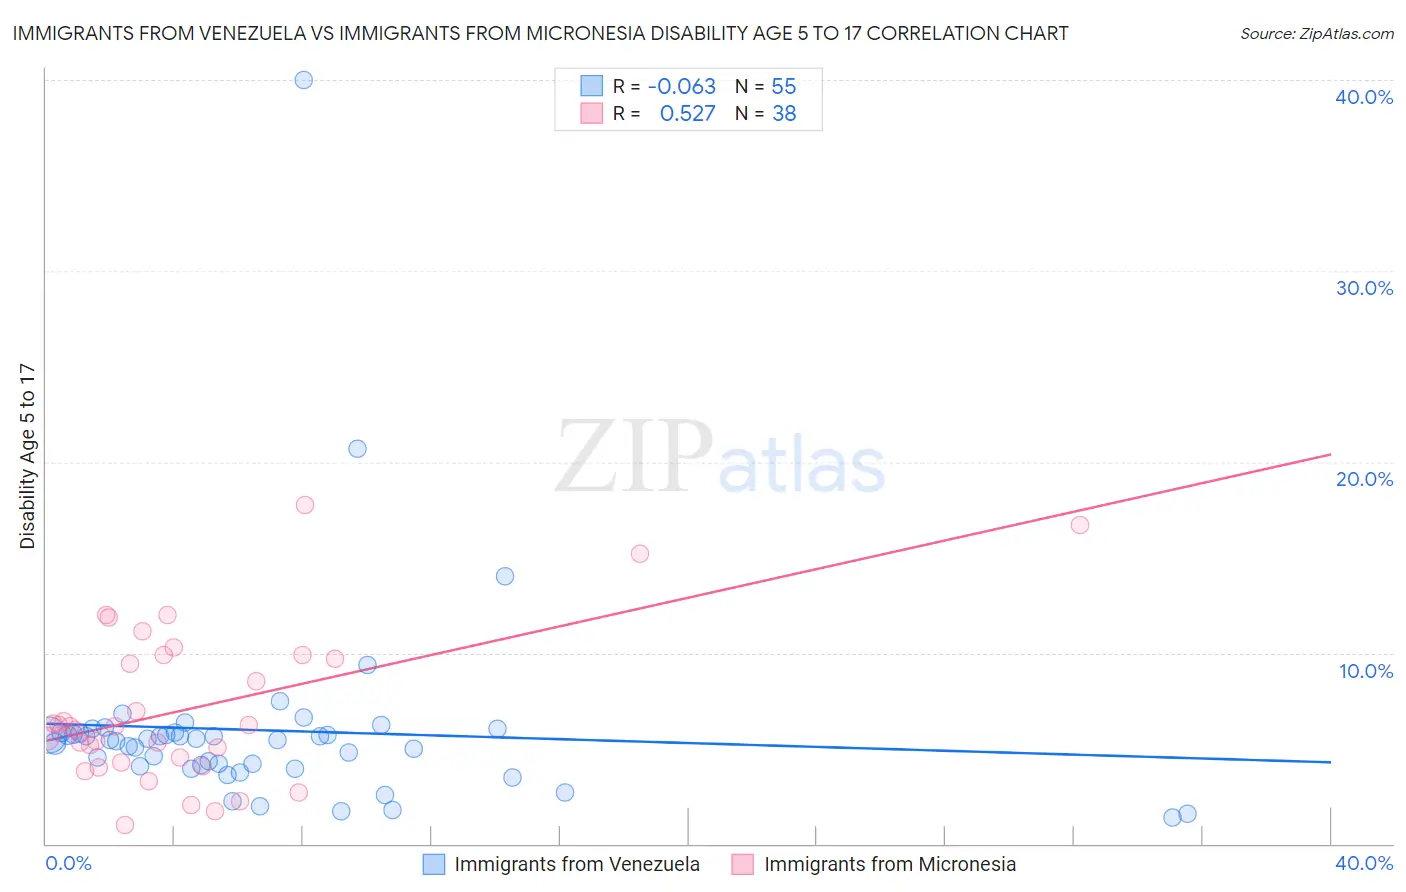 Immigrants from Venezuela vs Immigrants from Micronesia Disability Age 5 to 17